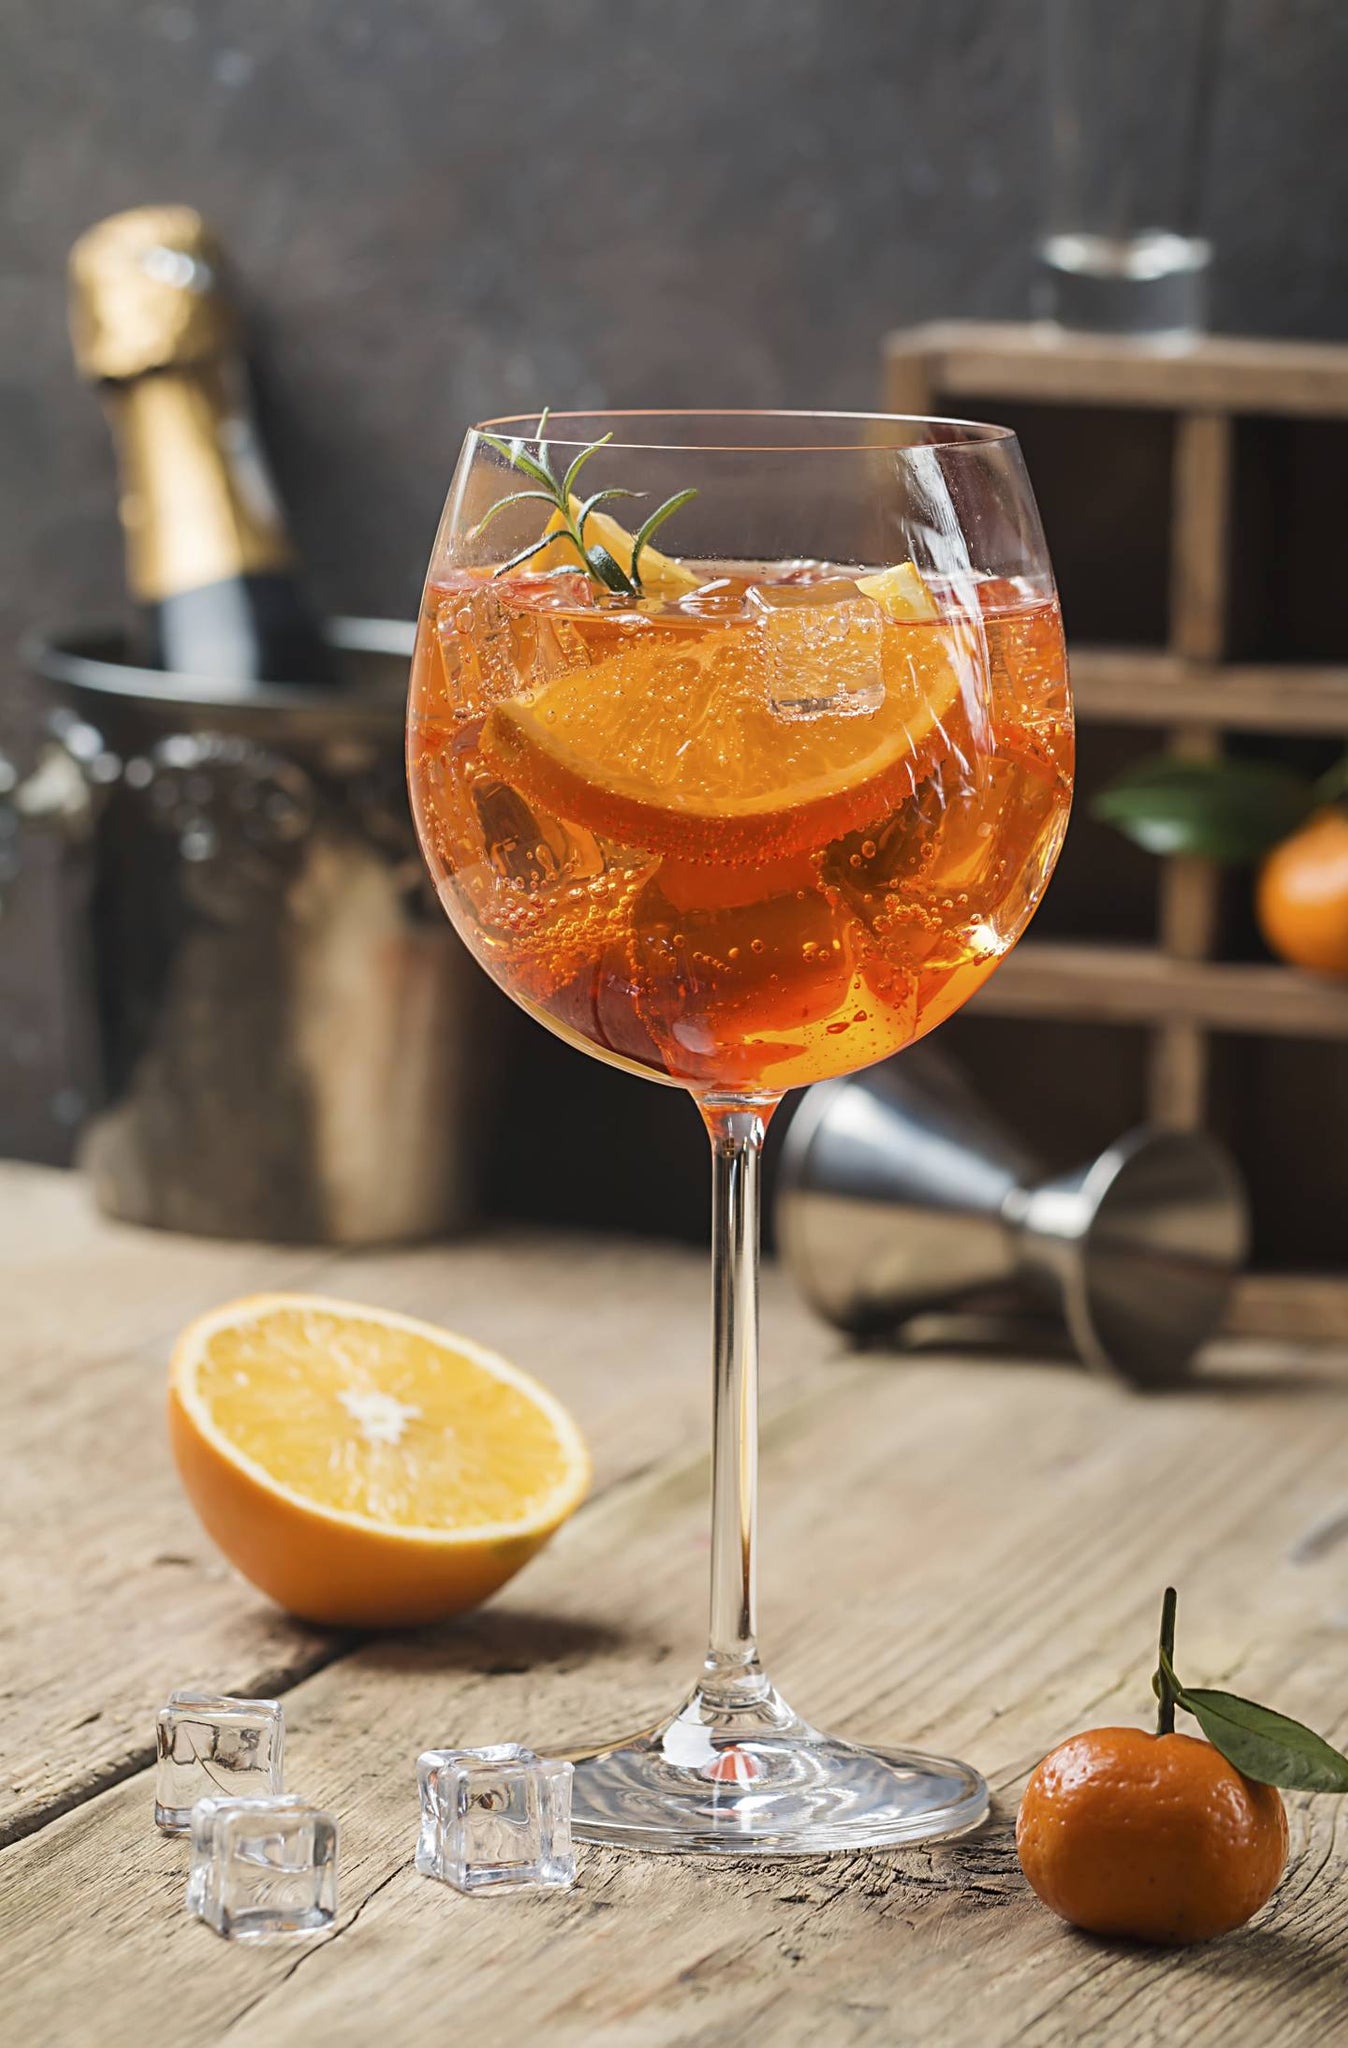 IT'S FRIDAY! CELEBRATE WITH AN APEROL SPRITZ...